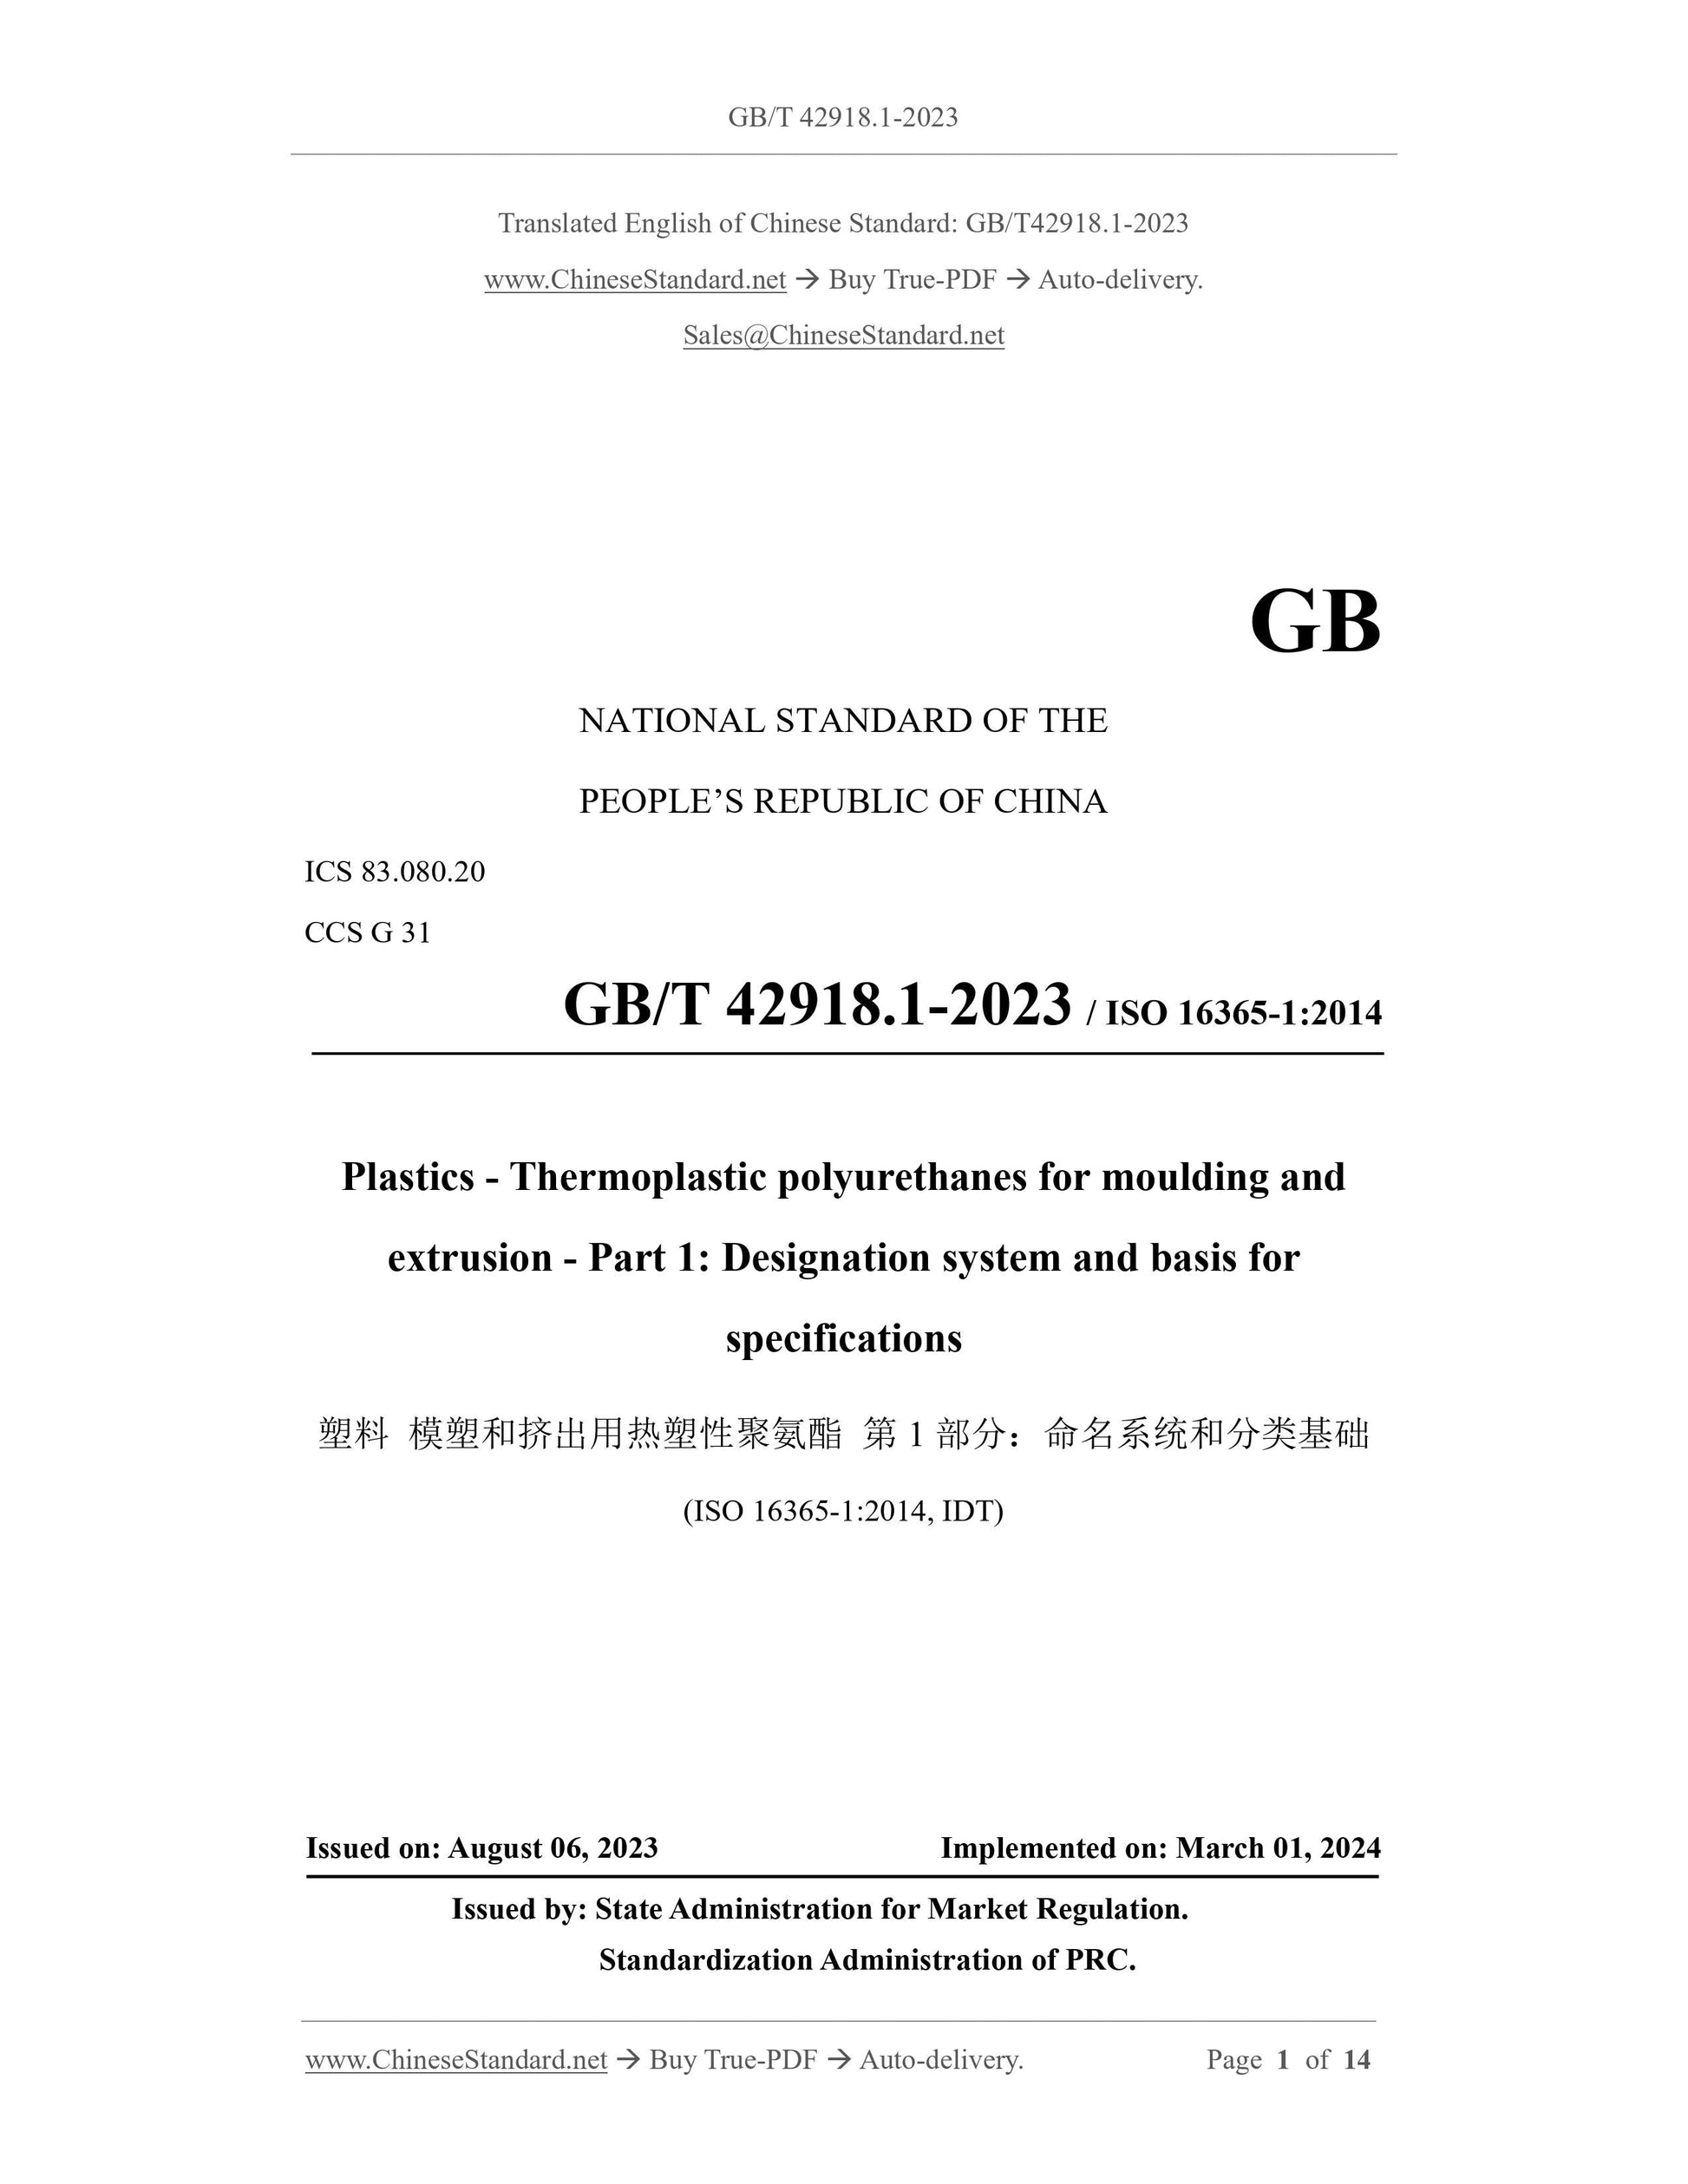 GB/T 42918.1-2023 Page 1